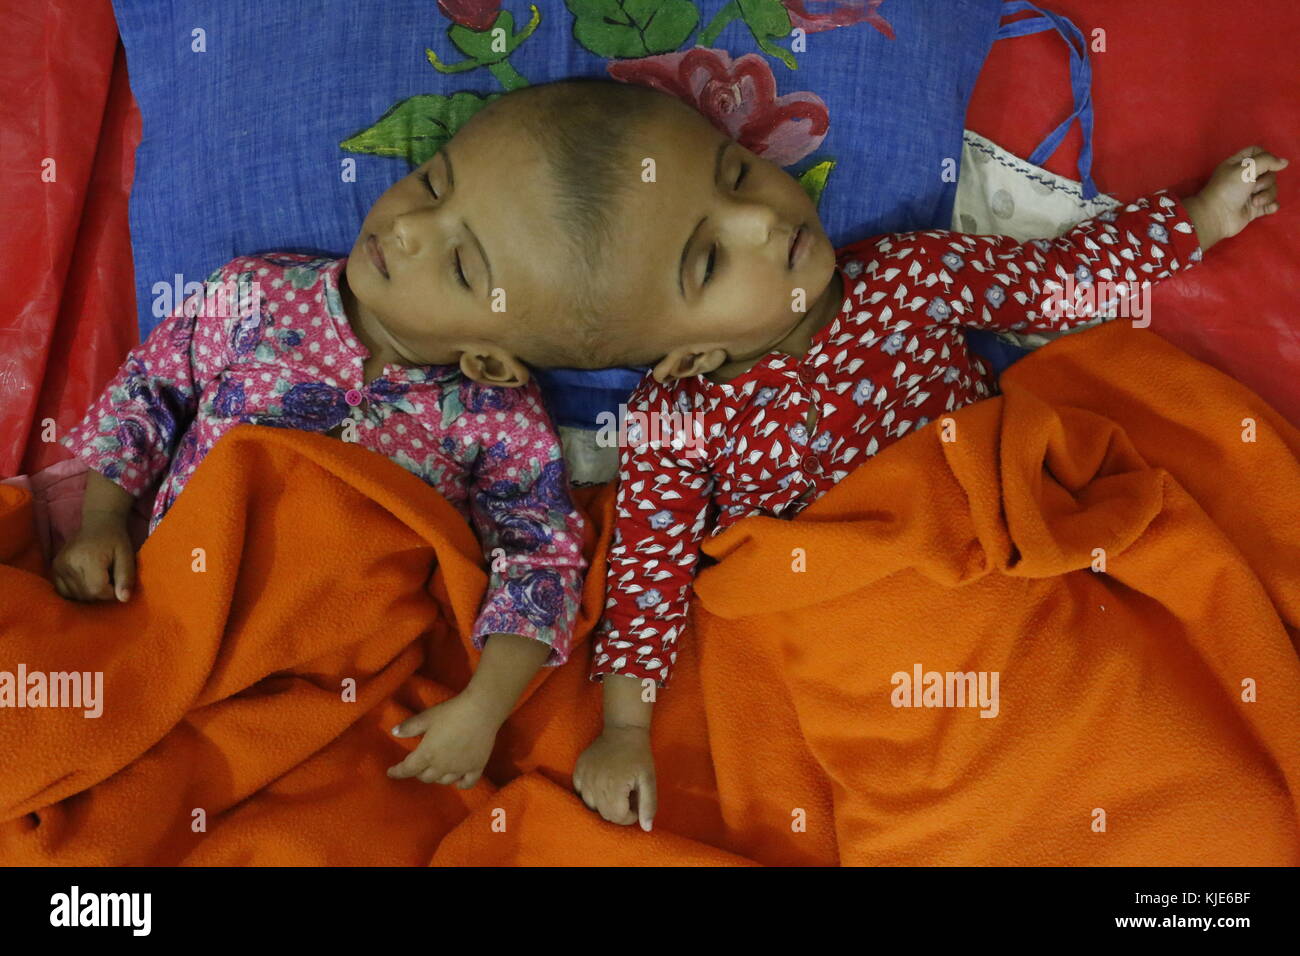 Dhaka, Bangladesh. 22nd Nov, 2017. Rabeya and Rokeya, 18 month old sister who born conjoined at head sleeping at the Dhaka Medical College Hospital (DMCH).The twins are offspring of Rafiqul Islam and Taslima Khatun from Atlongka village in Pabna's Chatmohar . Twins father Rafiqul Islam says, they have been admitted to the burn unit at the Dhaka Medical College Hospital for examination before surgery to separate their heads. Credit: Md. Mehedi Hasan/Pacific Press/Alamy Live News Stock Photo